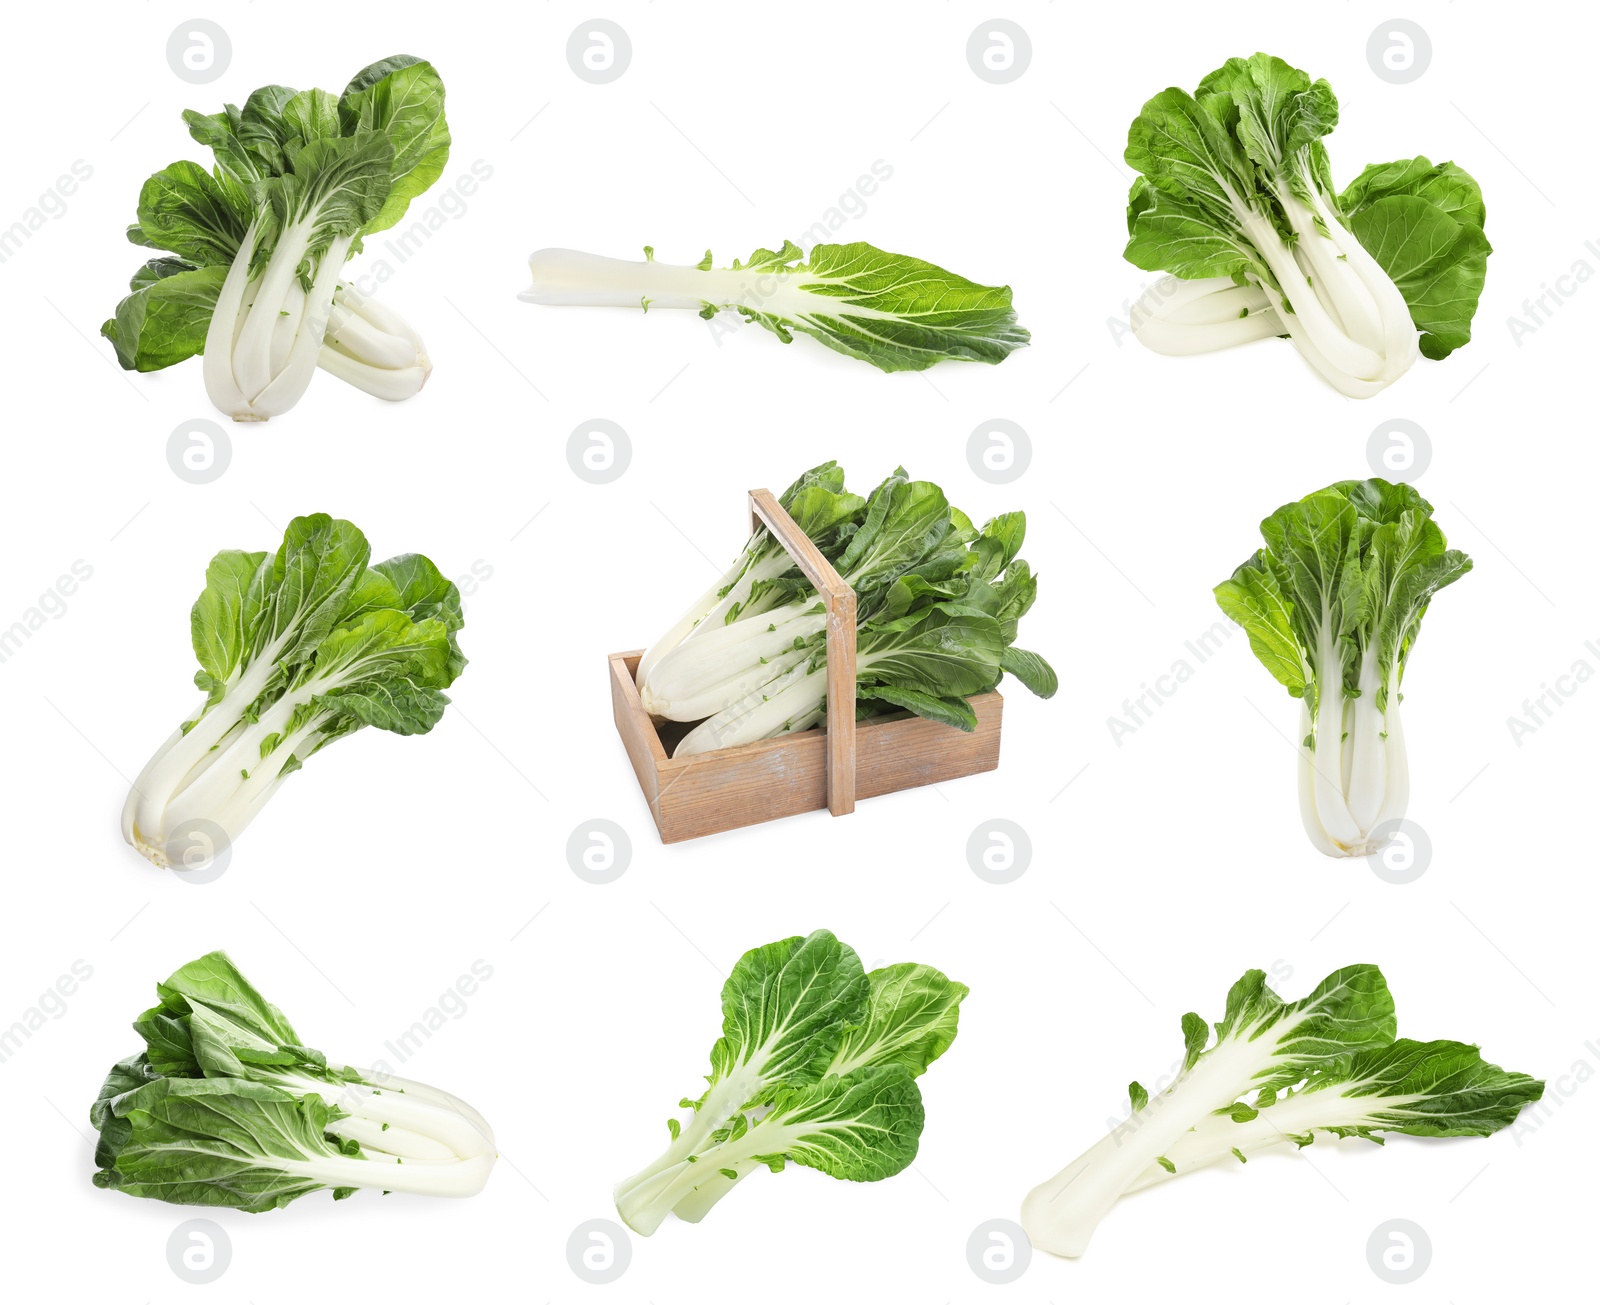 Image of Collage with fresh pak choy cabbages and leaves on white background